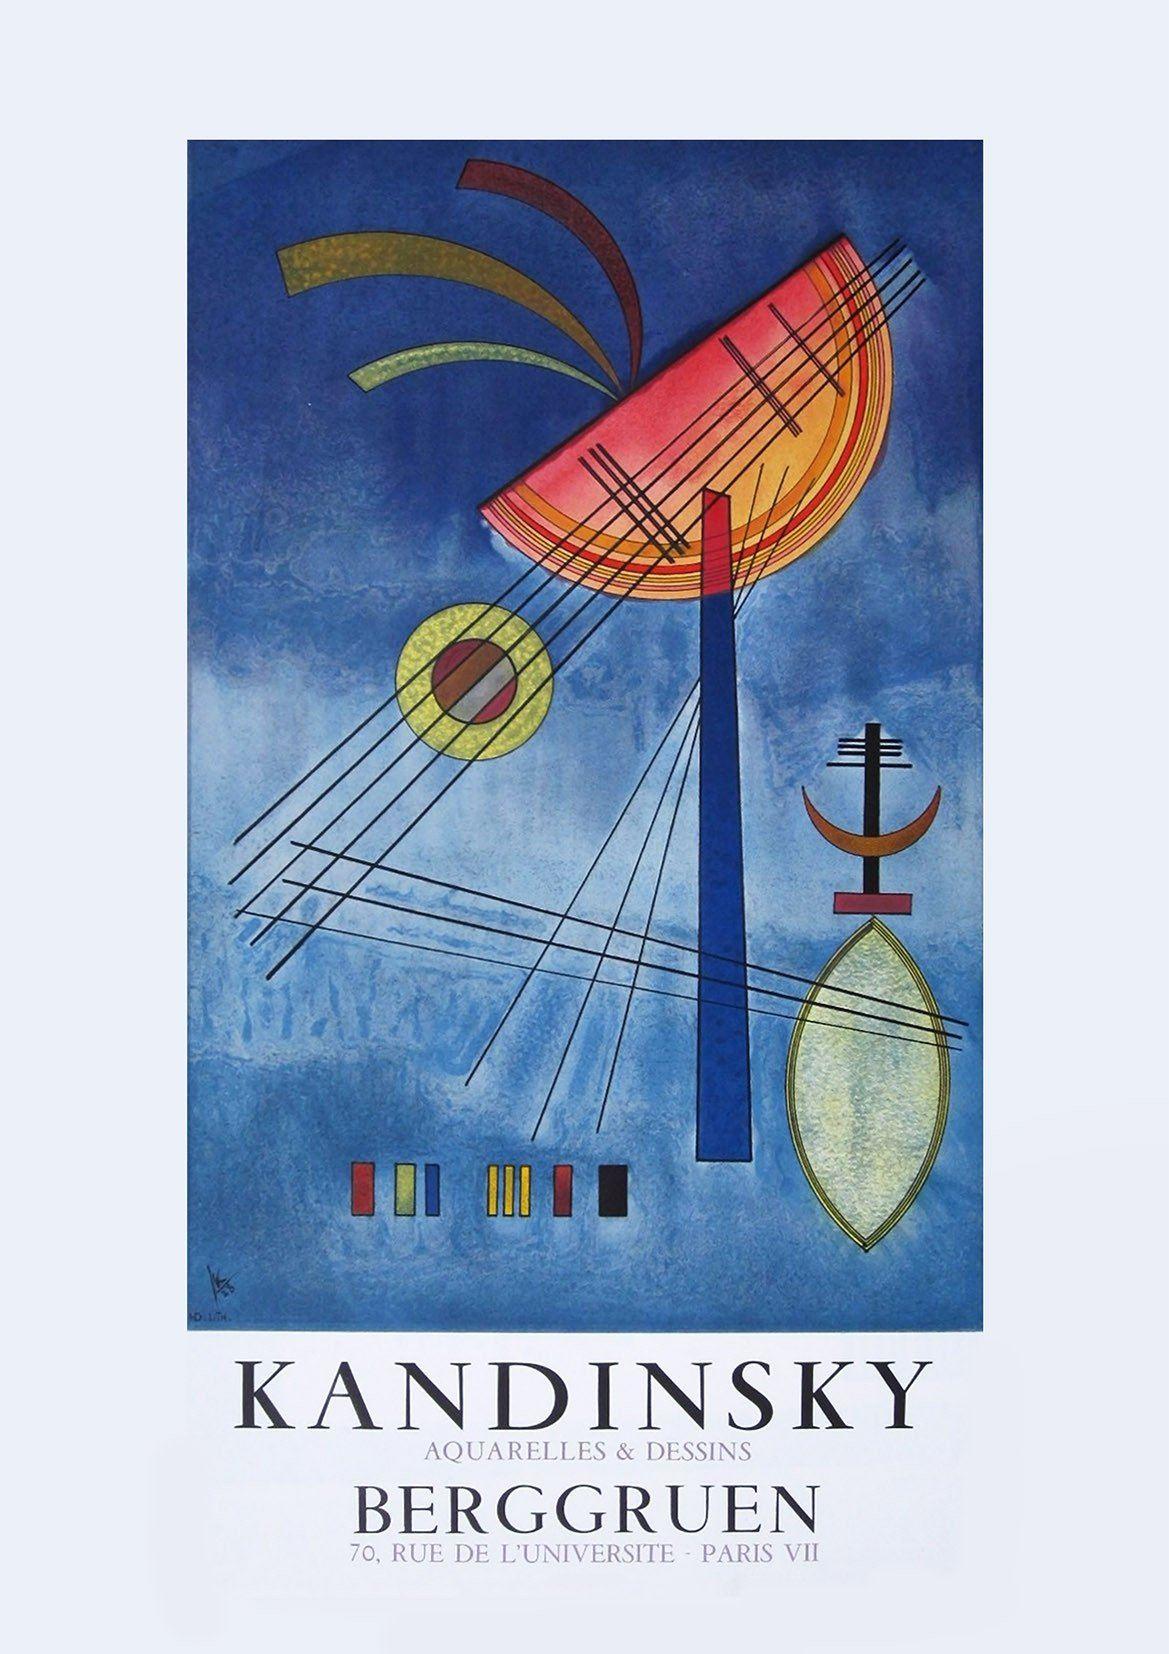 KANDINSKY EXHIBITION POSTER: Reproduction Gallery Poster - Pimlico Prints